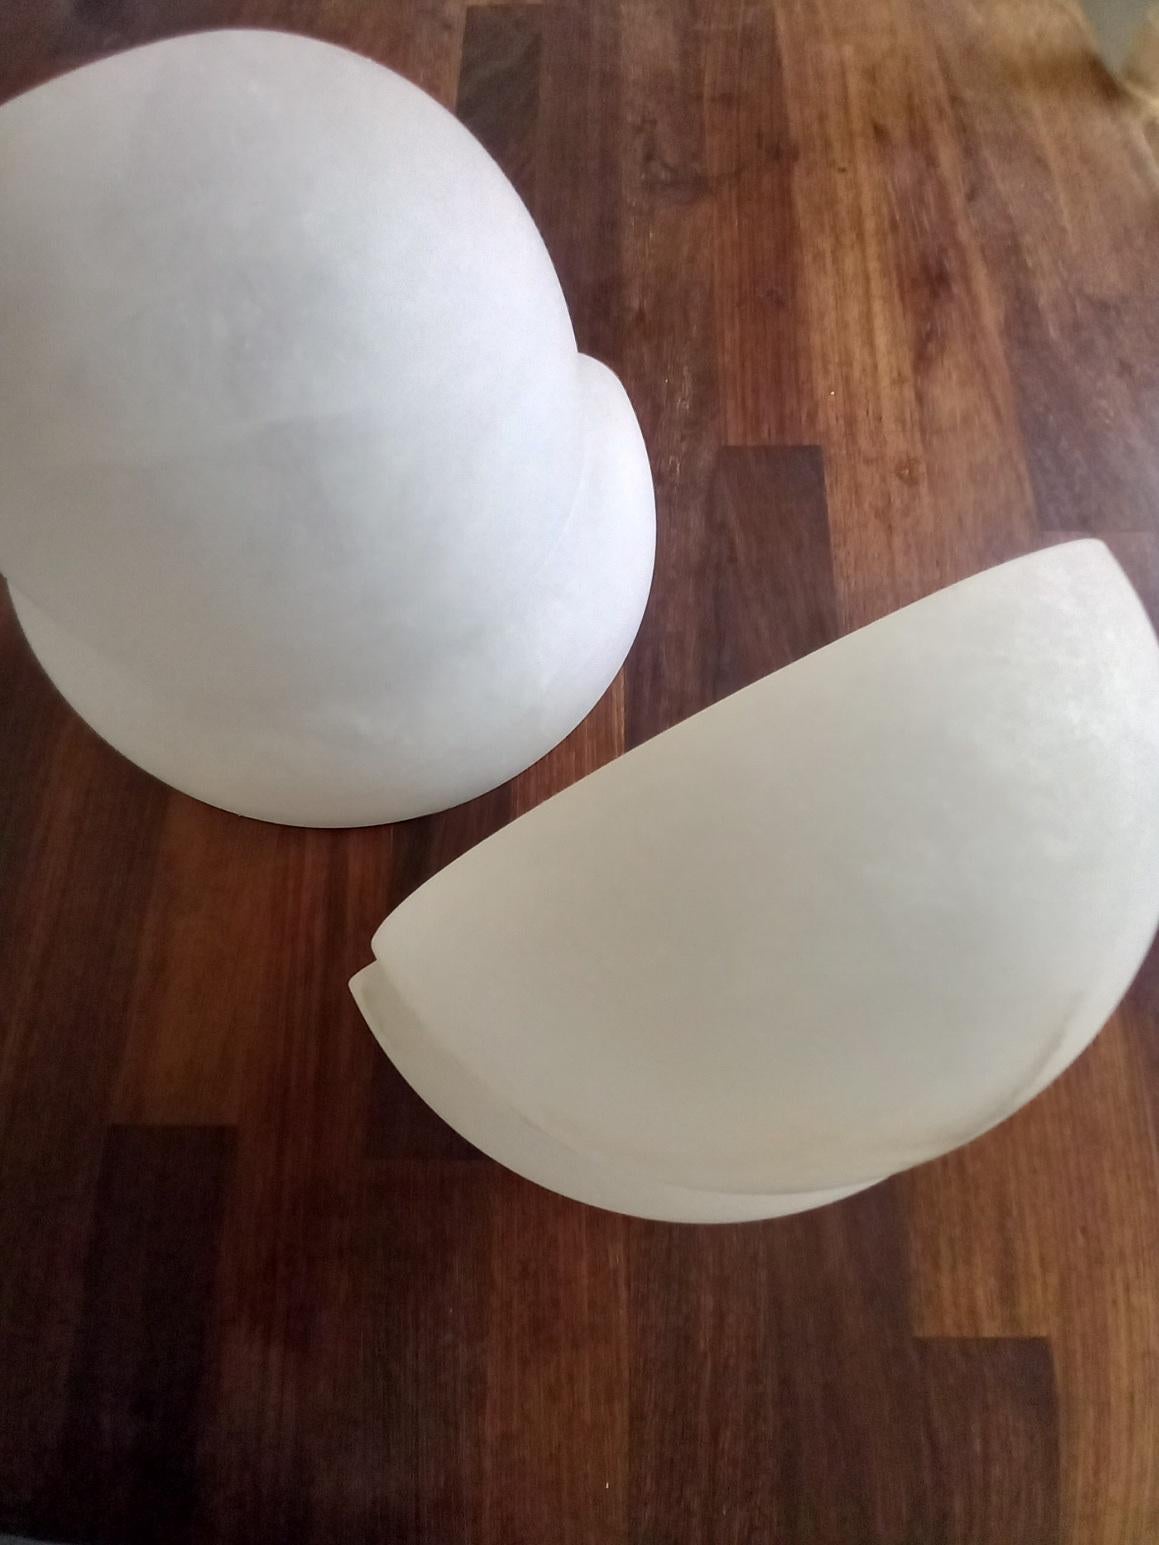 White natural alabaster sconces
It is a very special piece, the white is very pure and one of them has a nice gray streak so characteristic, looking very pretty when illuminated
their shapes are rounded,
It is in excellent condition, like new. It